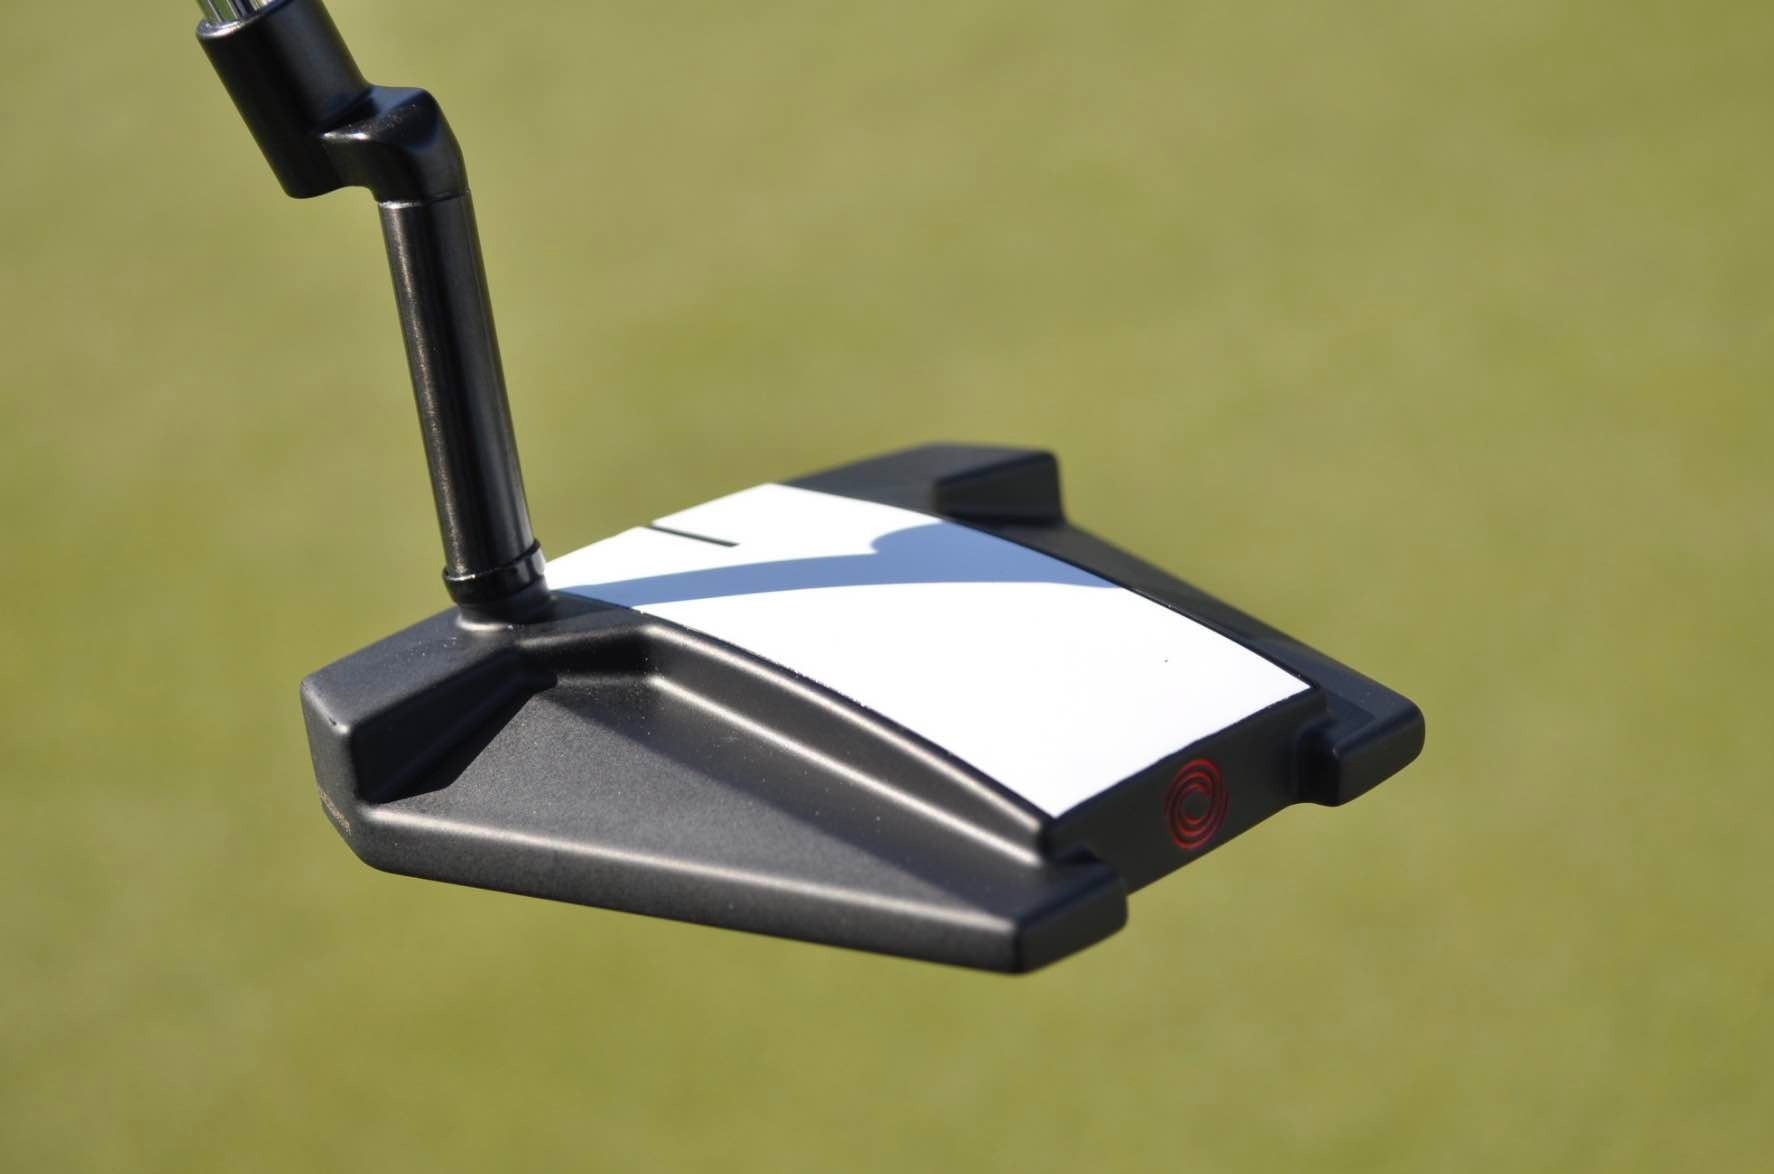 Odyssey's popular Versa putters are back FIRST LOOK